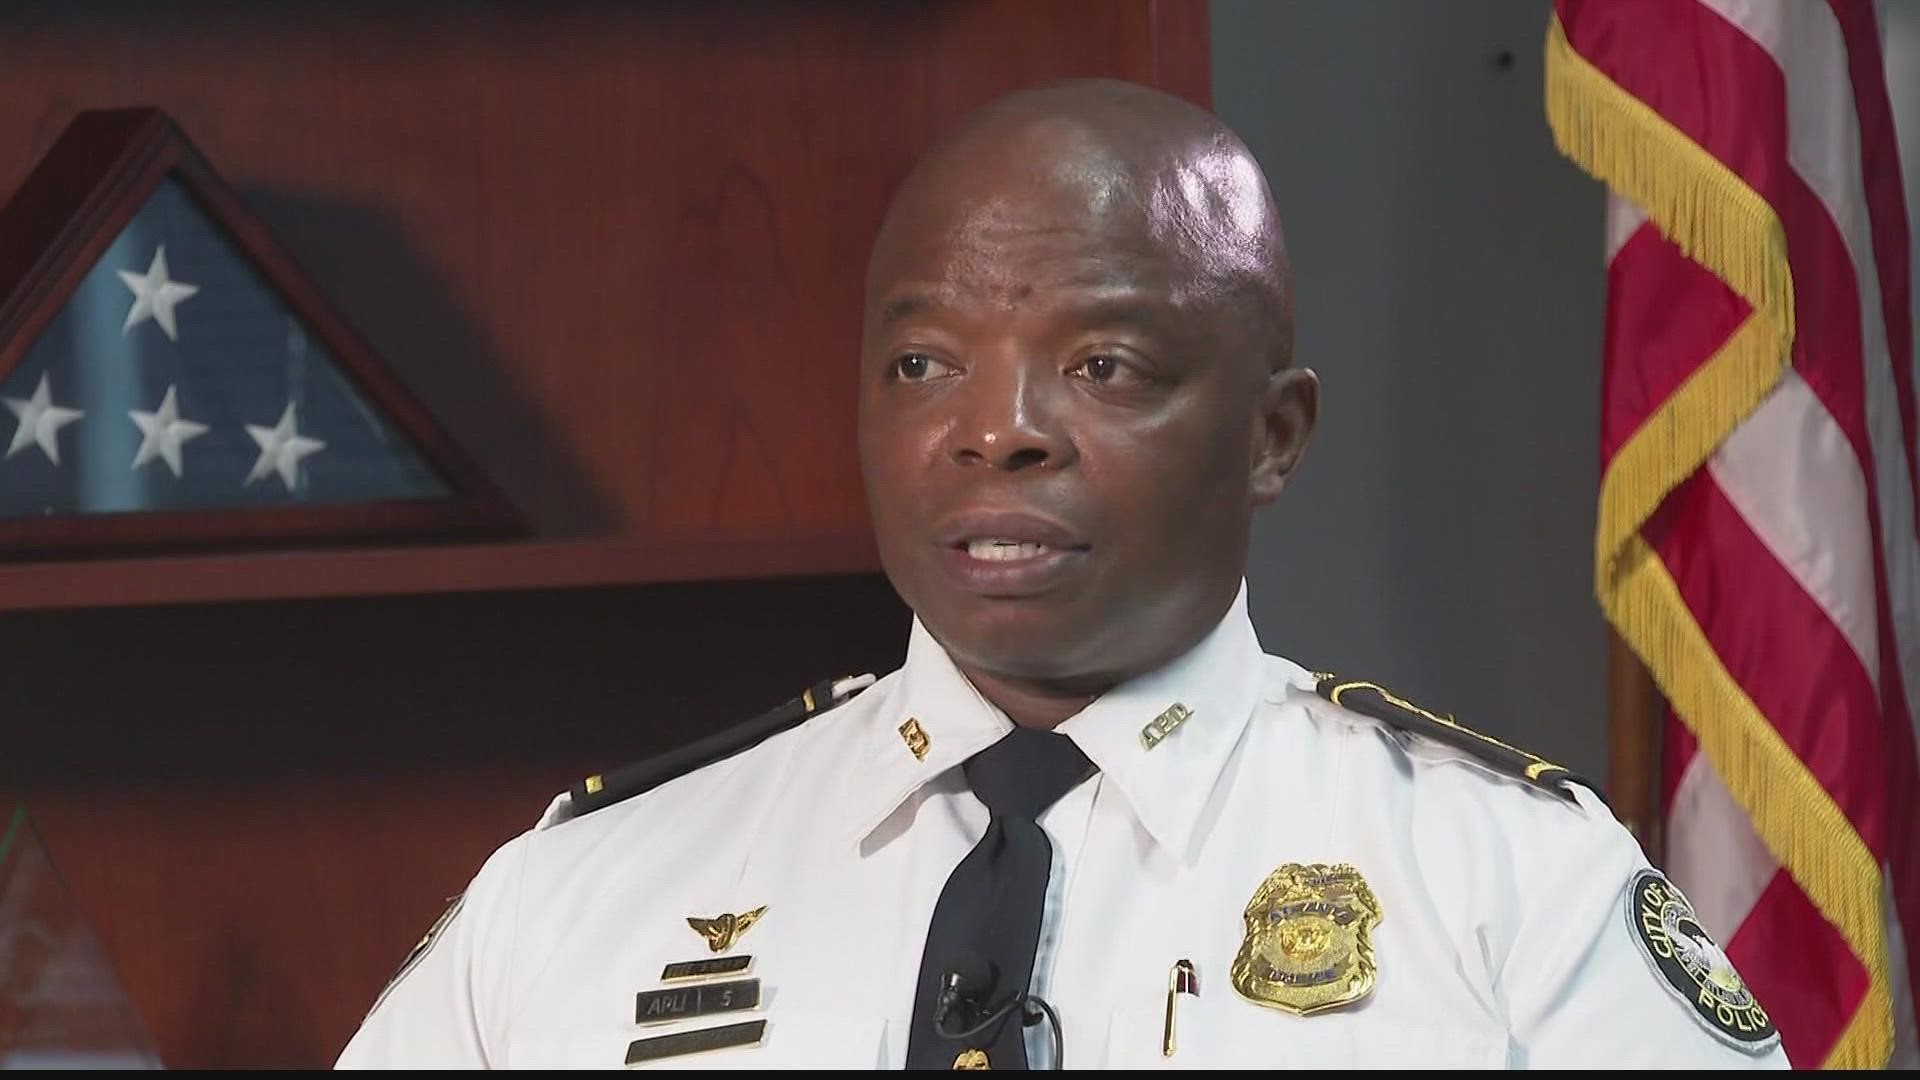 APD Police Chief Rodney Bryant will soon retire. He's talking about crime and how the next chief needs to lead.